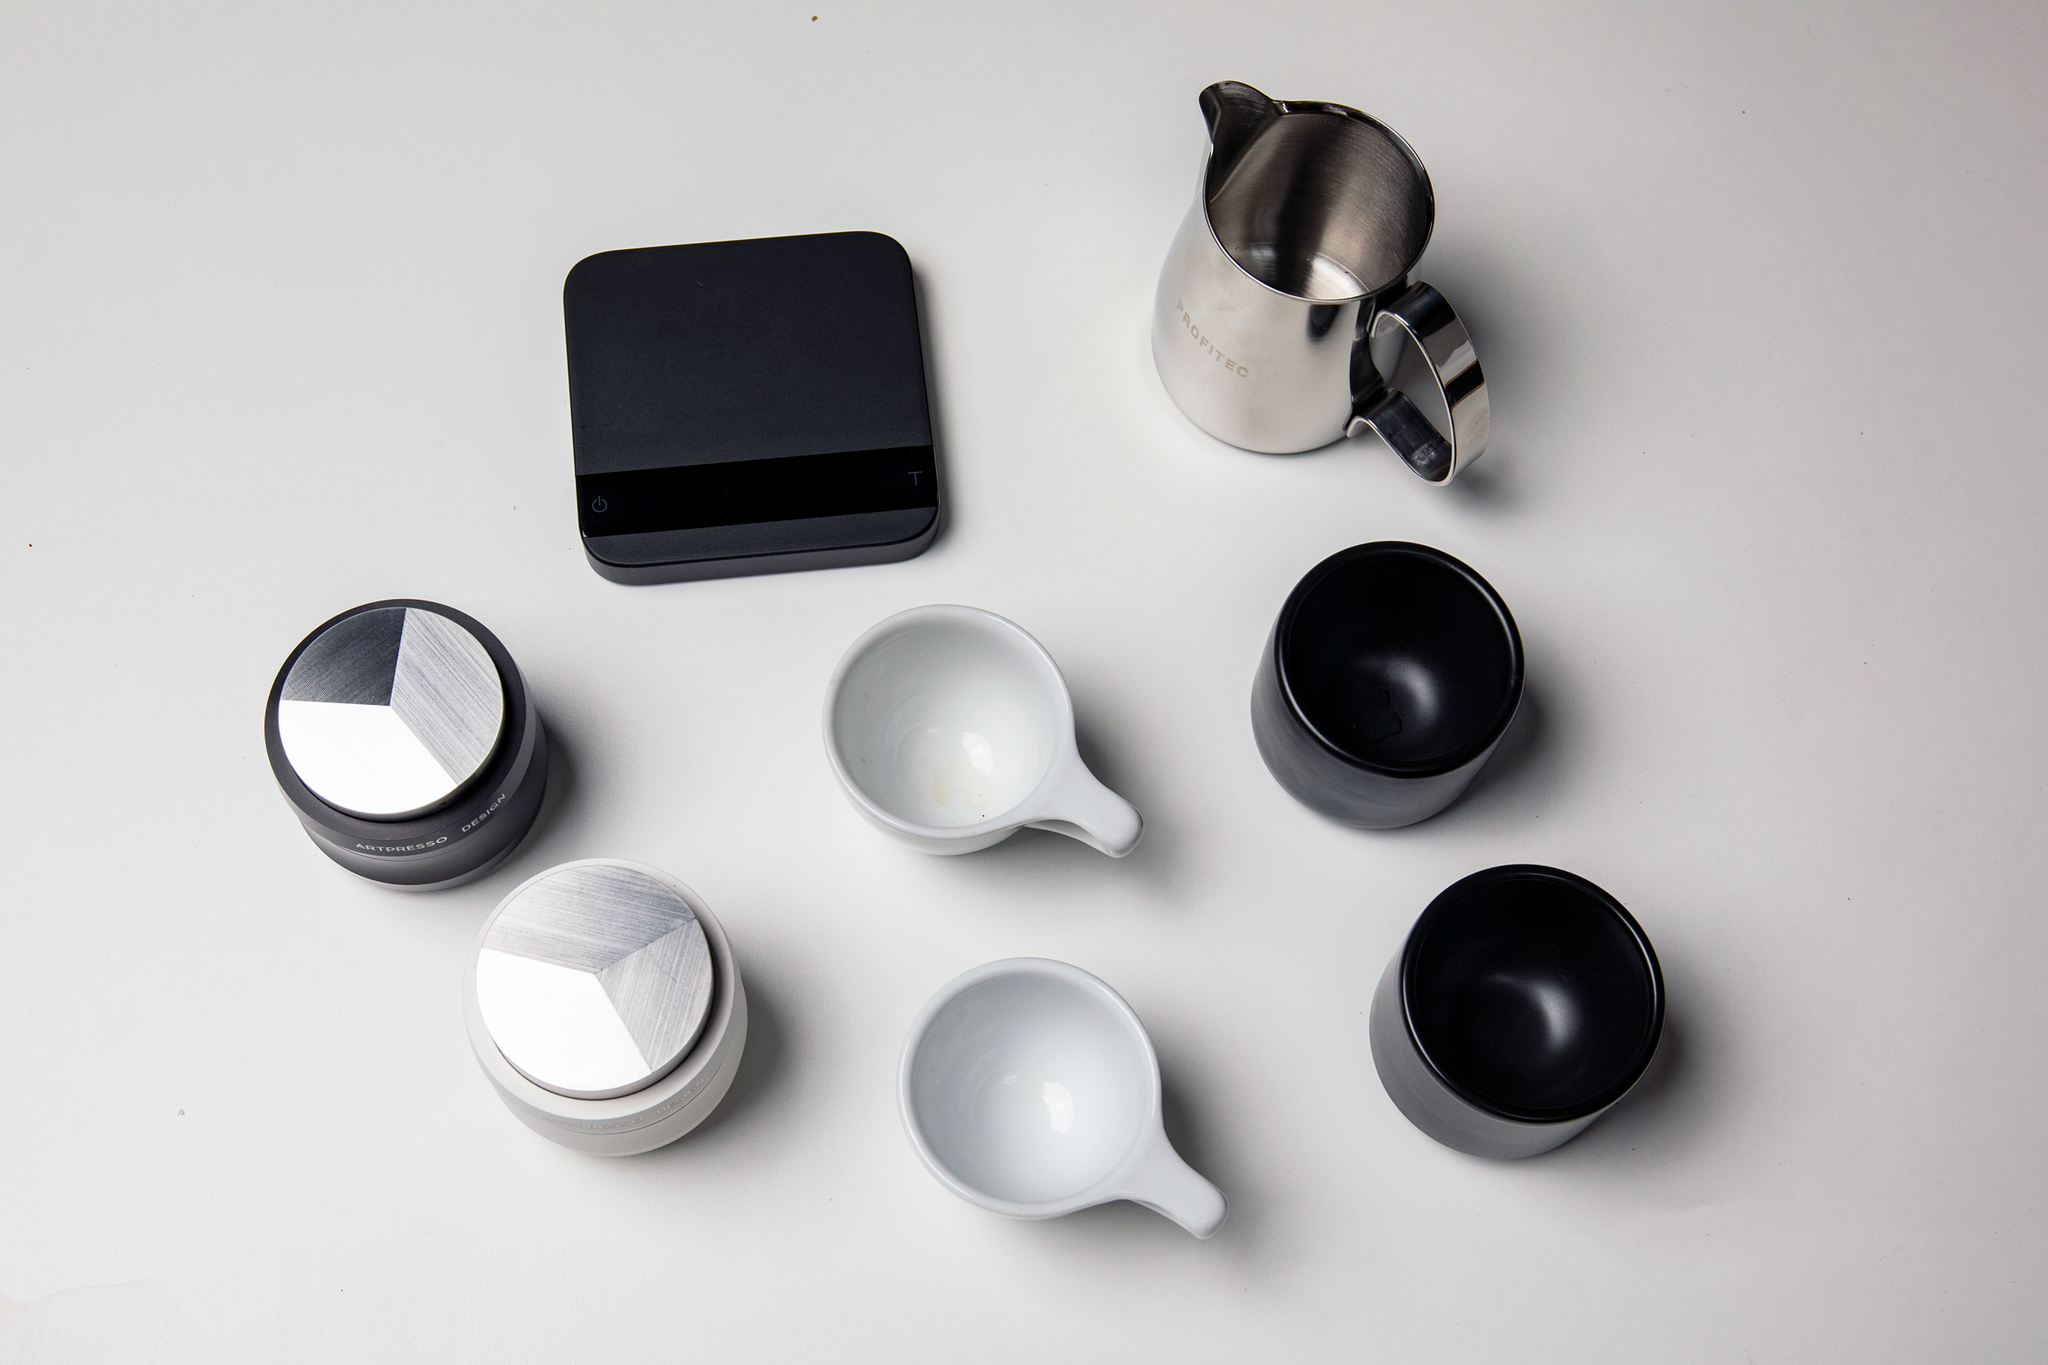 Artpresso Solo Tamper and Distribution Tool Black and White, Acaia Lunar Scare, Fellow Monty Cups, notNeutral cups, Profitec Pitcher